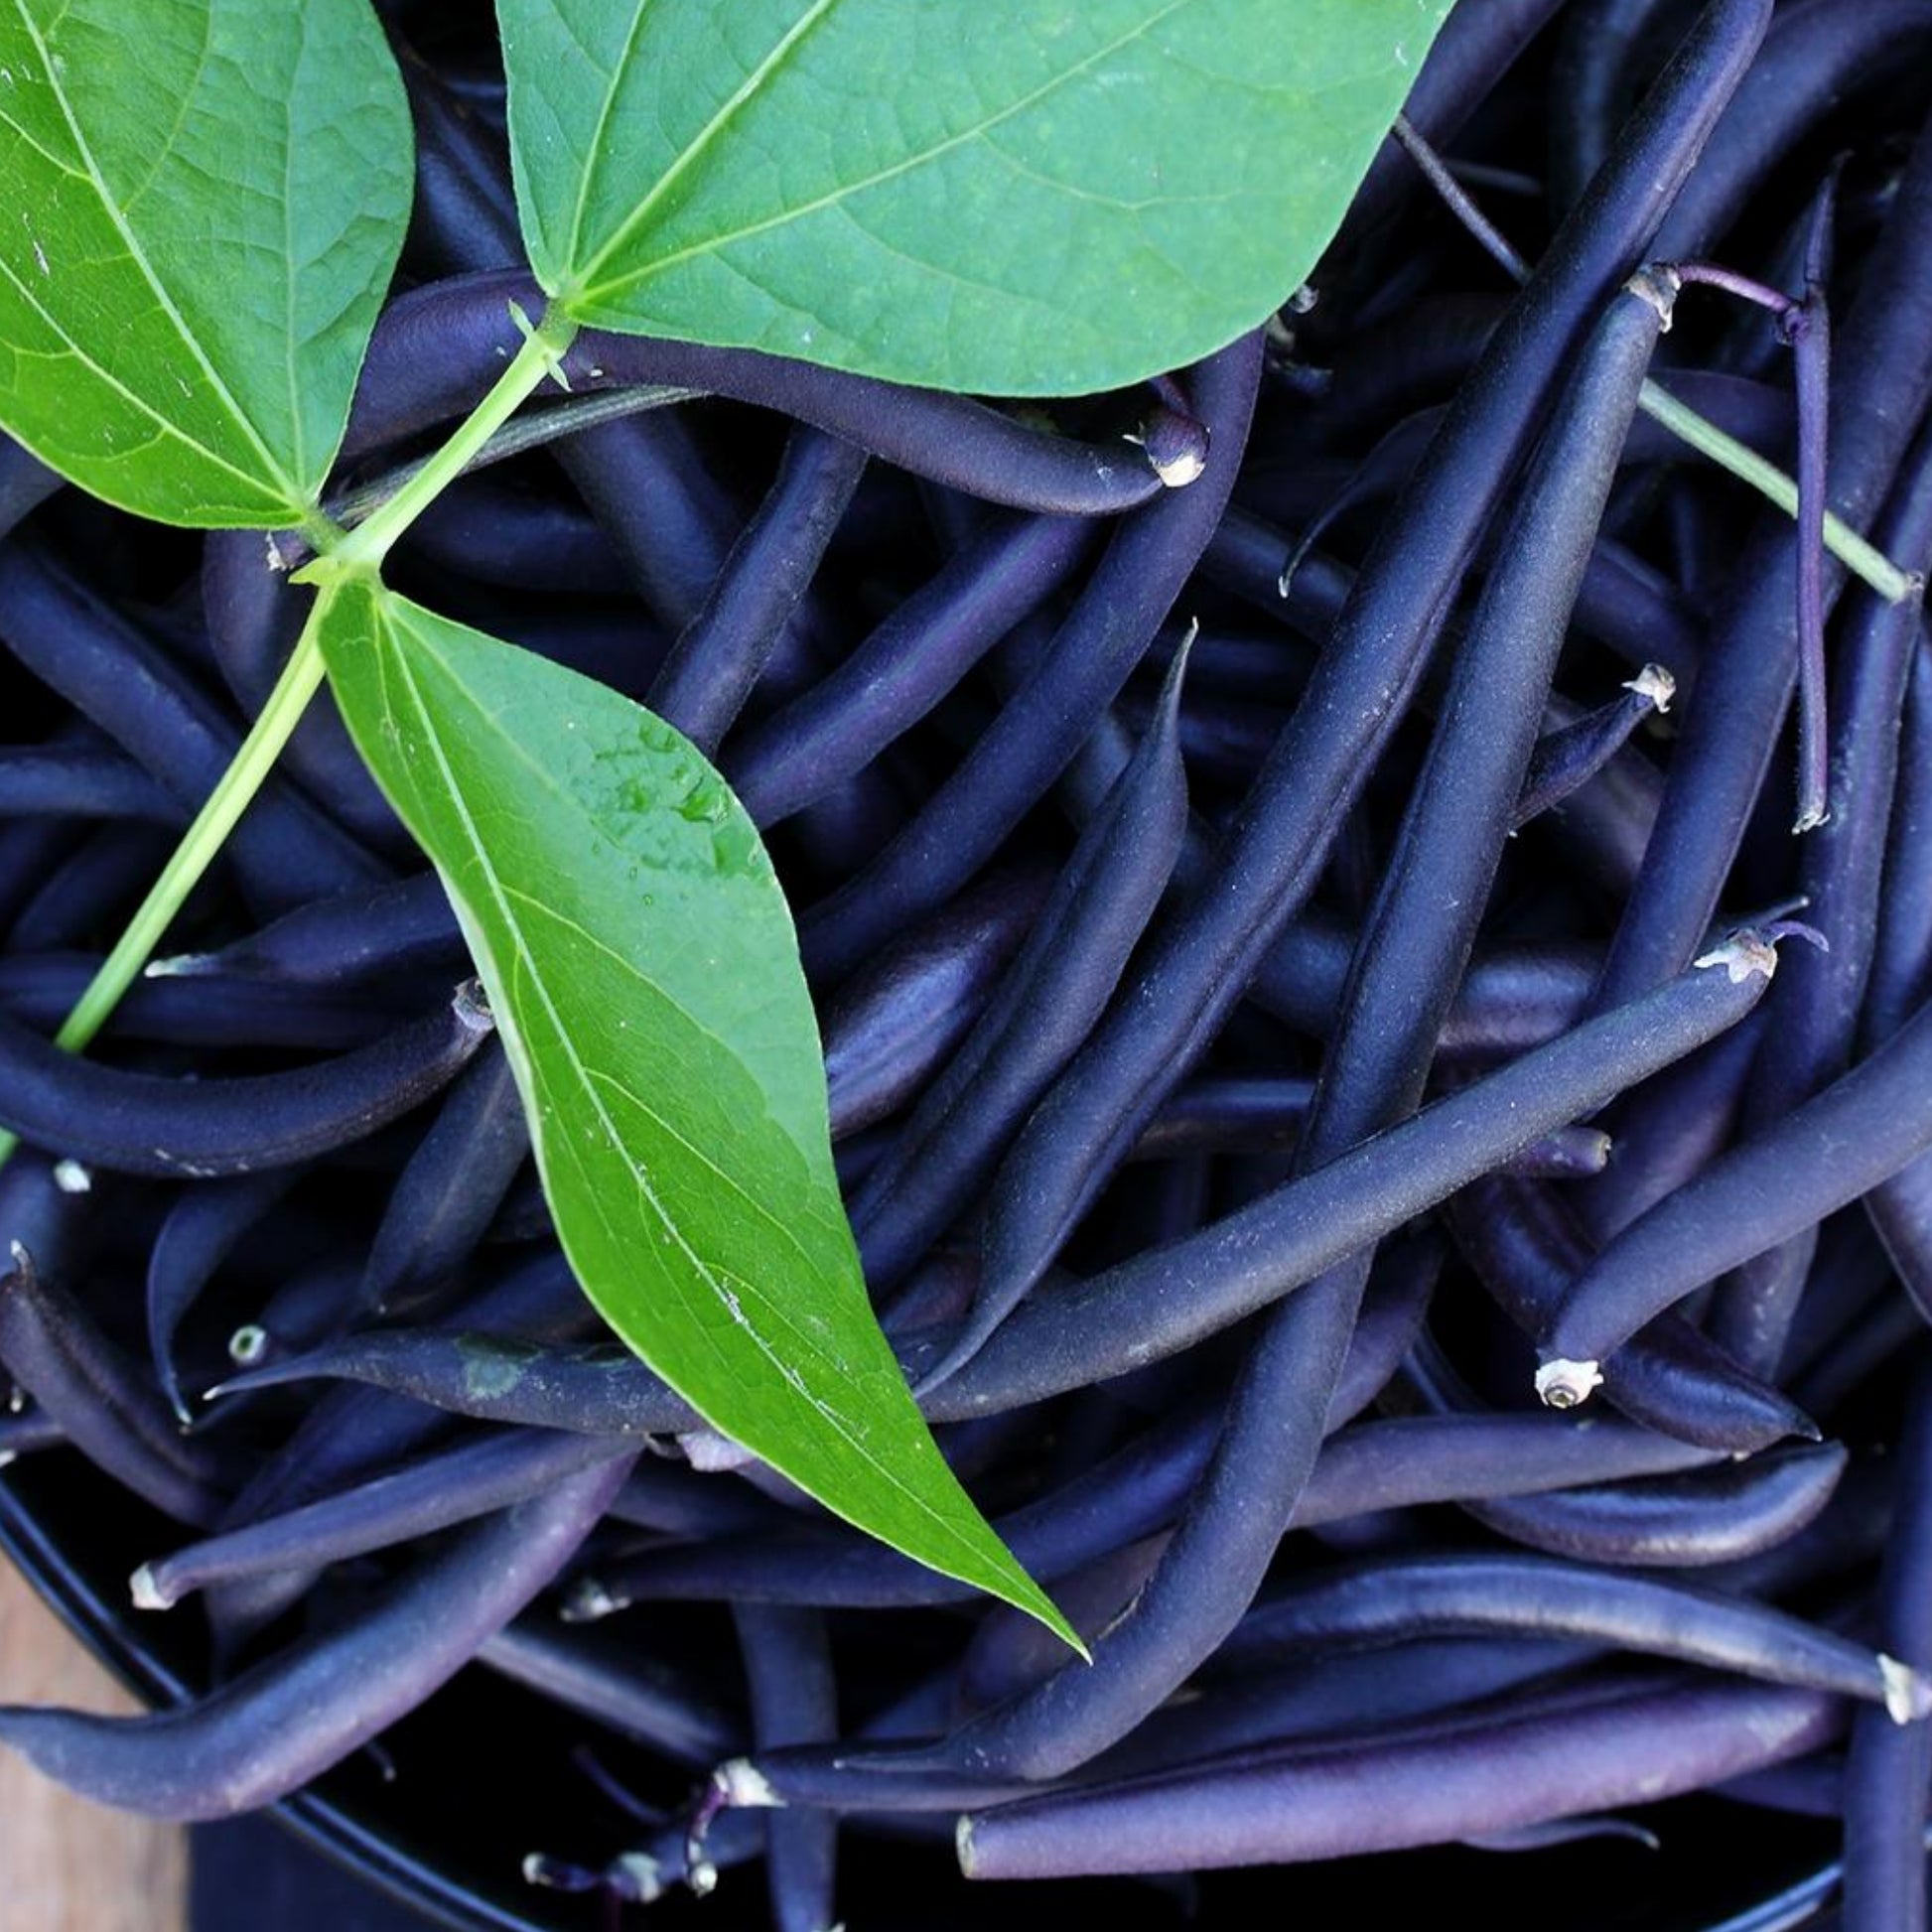 Purple Green Beans - Seeds - Non Gmo - Heirloom Seeds – Bean Seeds - Grow Your Own Food At Home! - Fast Growing Variety! Fresh Seeds!